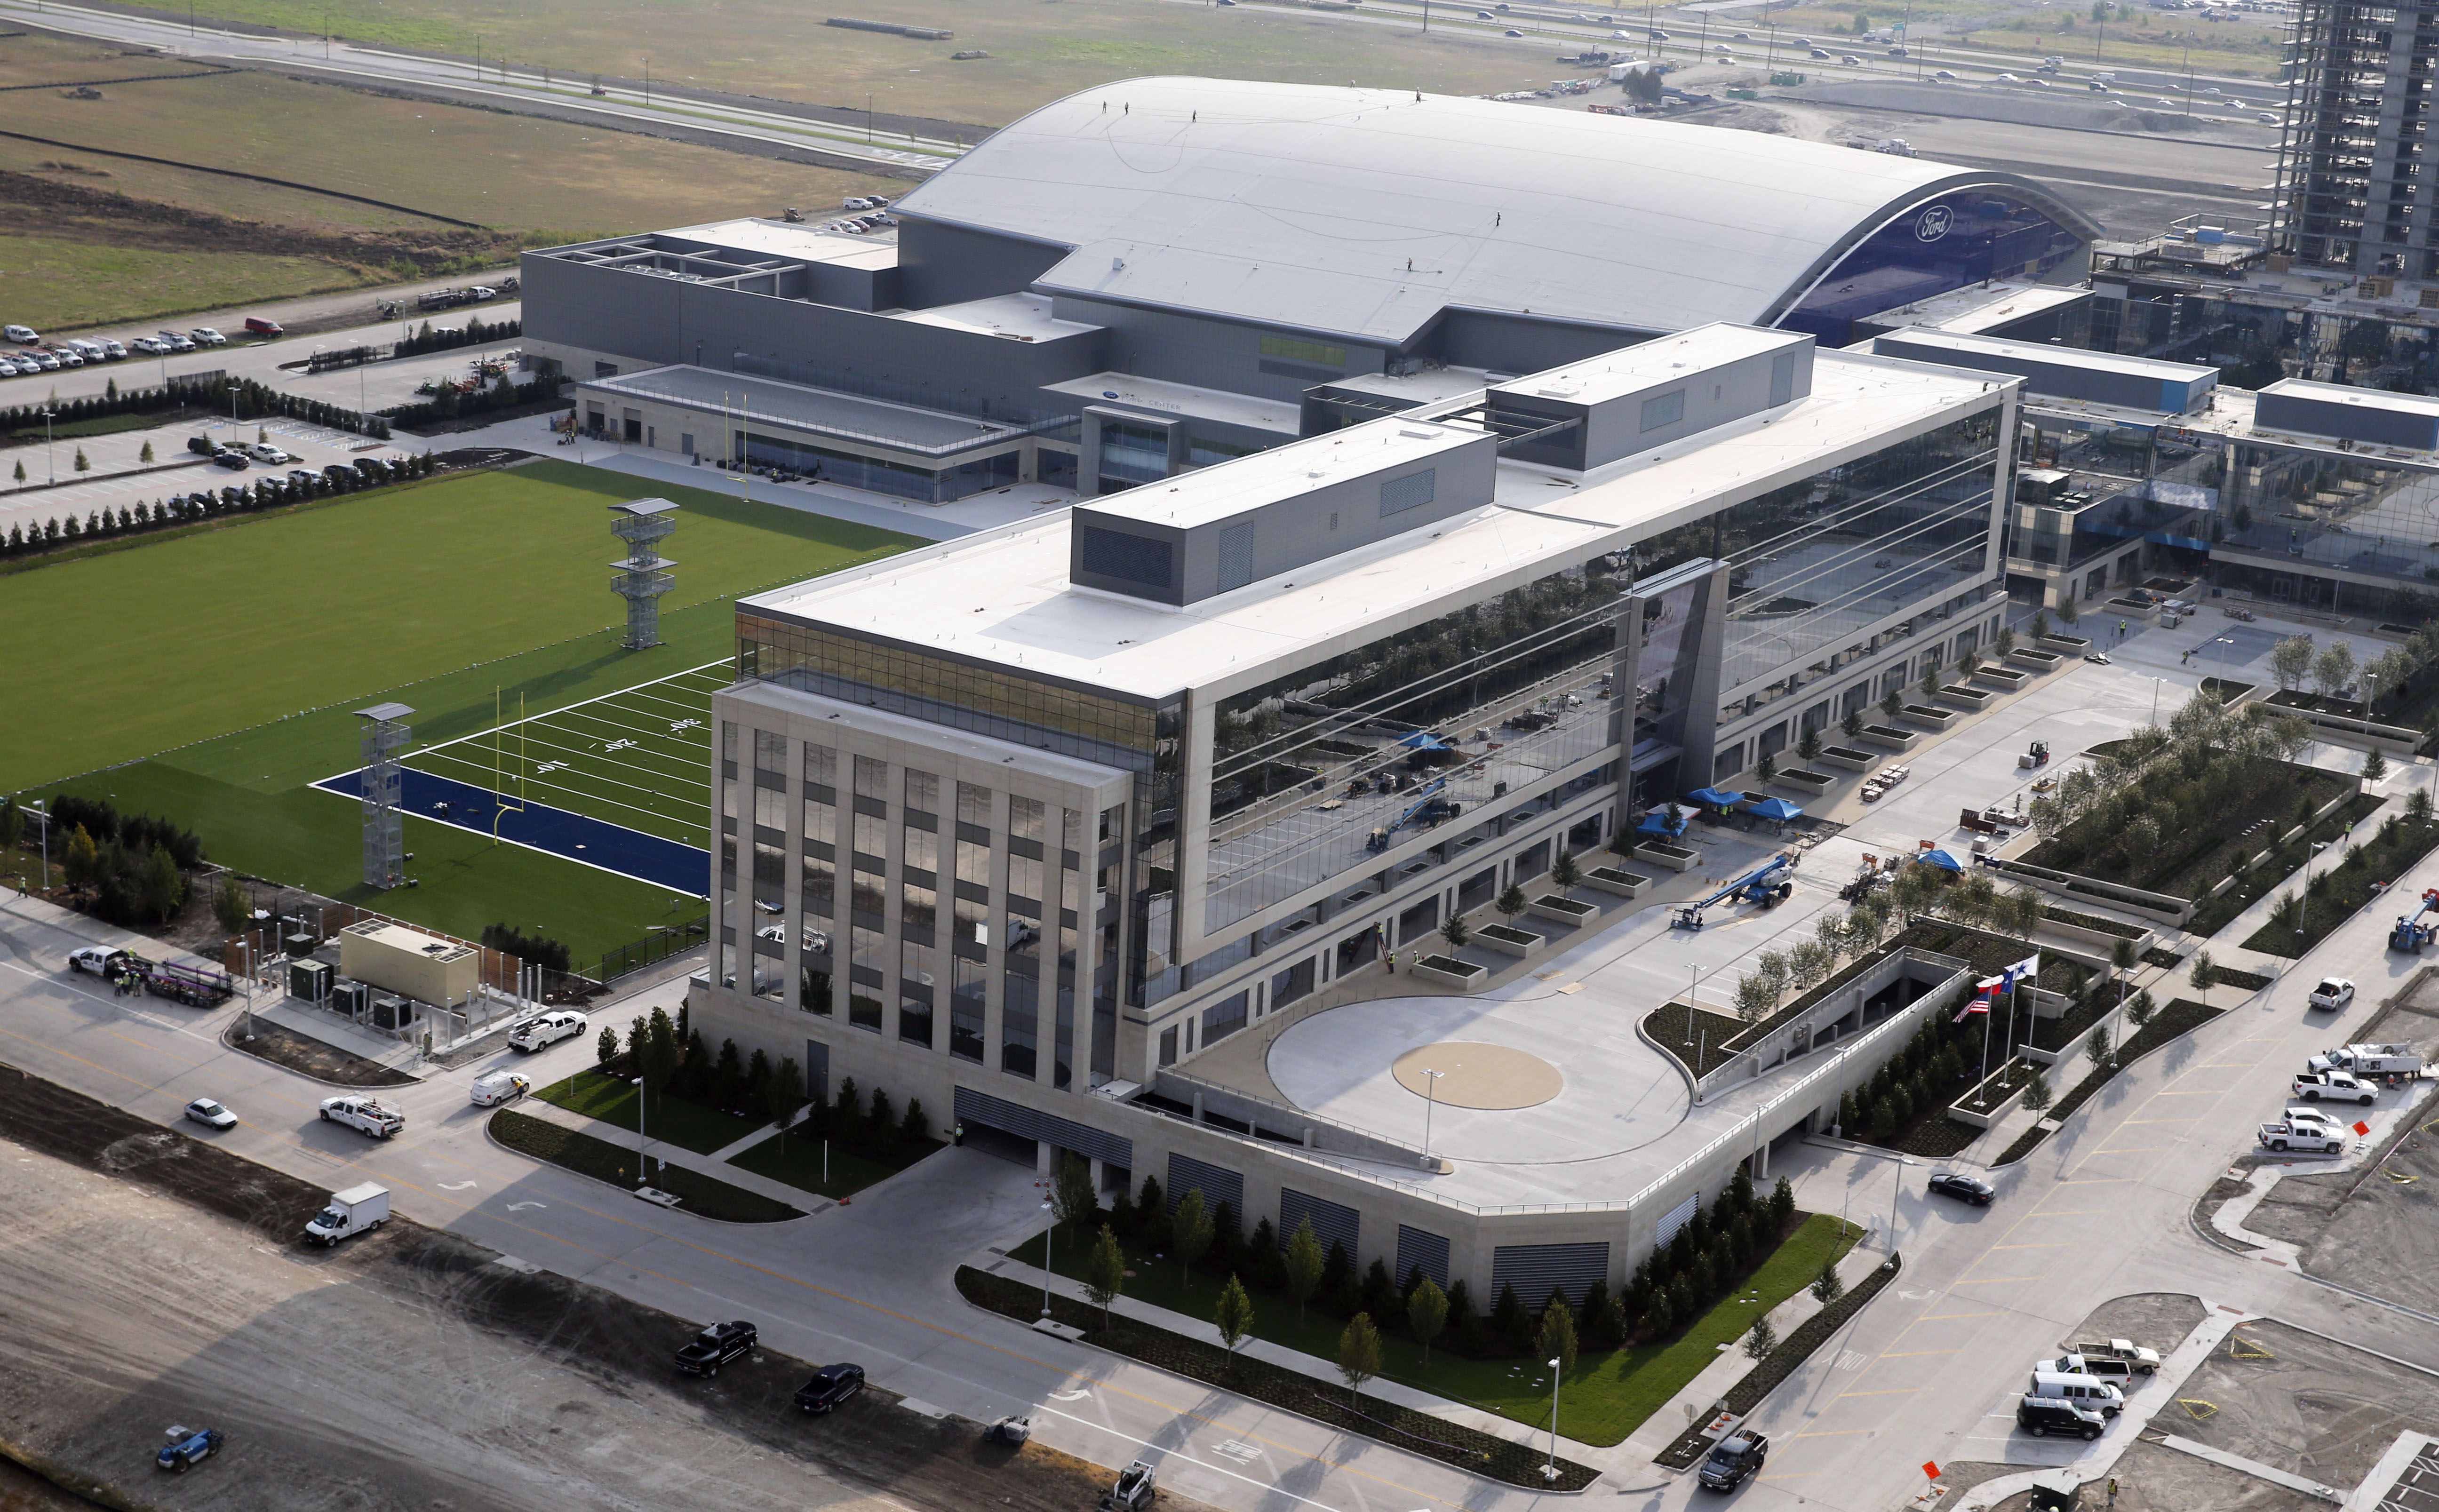 Dallas Cowboys are making a shared-office play at The Star in Frisco